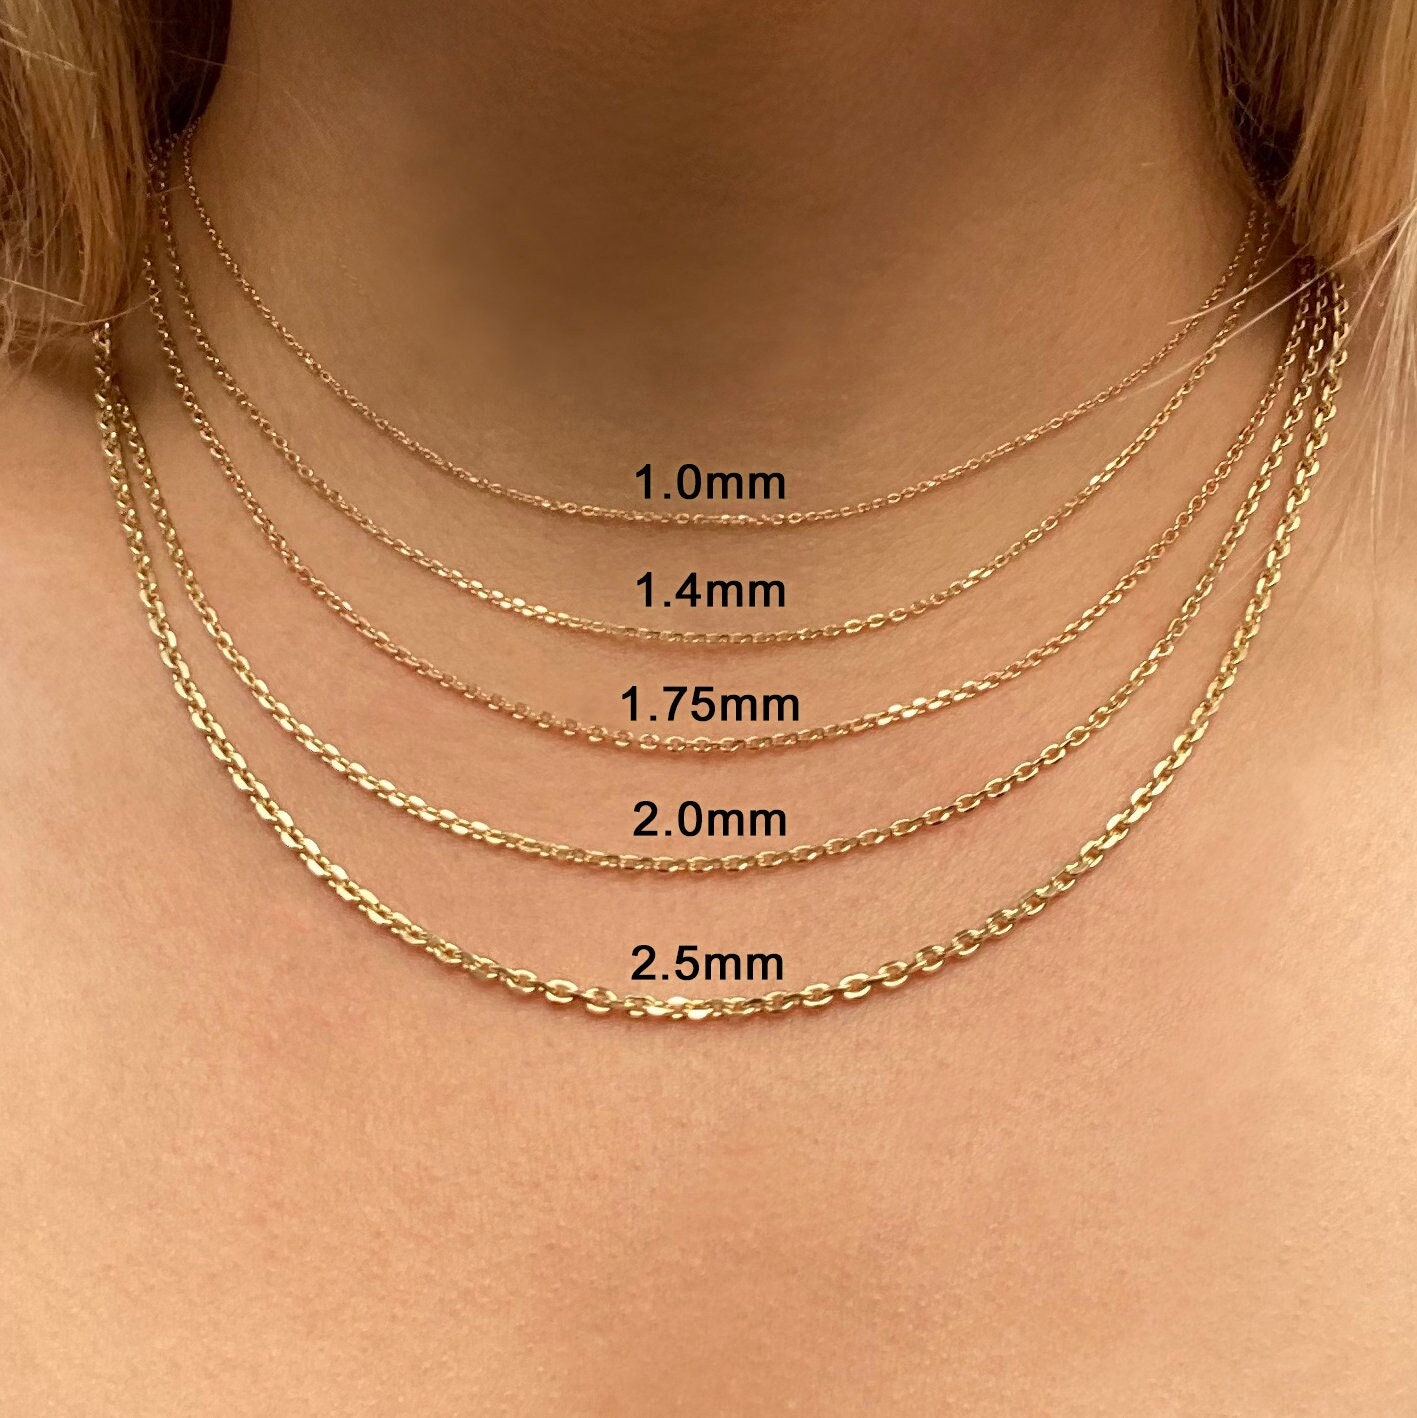 Stainless Steel 3.5x4.5mm Small Diamond Cut Cable Chain sold by the foot at   Chain0202sst